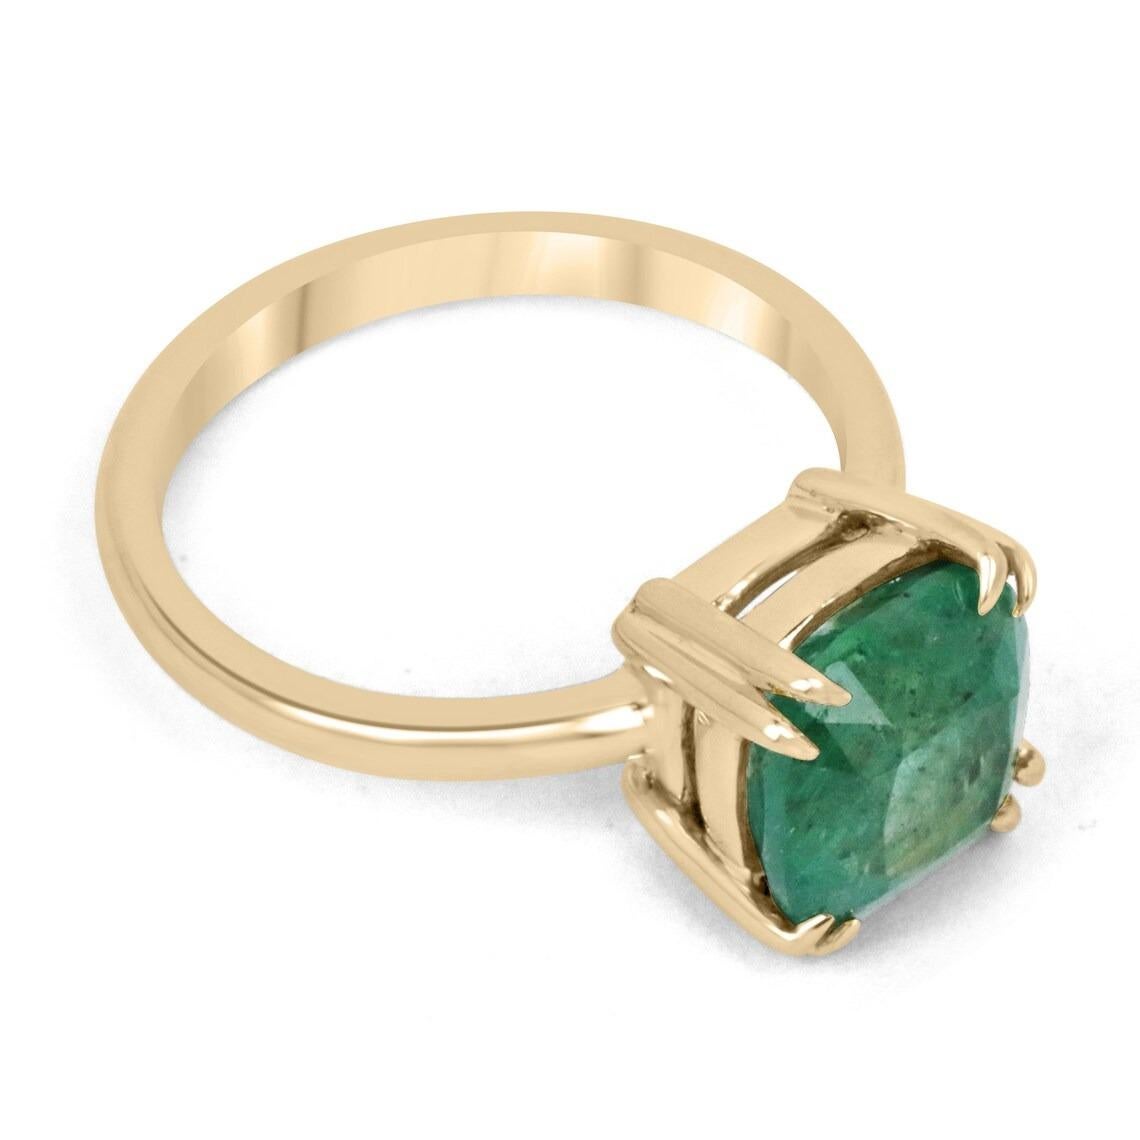 Displayed is a classic emerald solitaire, cushion-cut, engagement ring/right-hand ring in 14K yellow gold. This gorgeous solitaire ring carries a full 3.65-carat emerald in a double claw prong setting. Fully faceted, this gemstone showcases